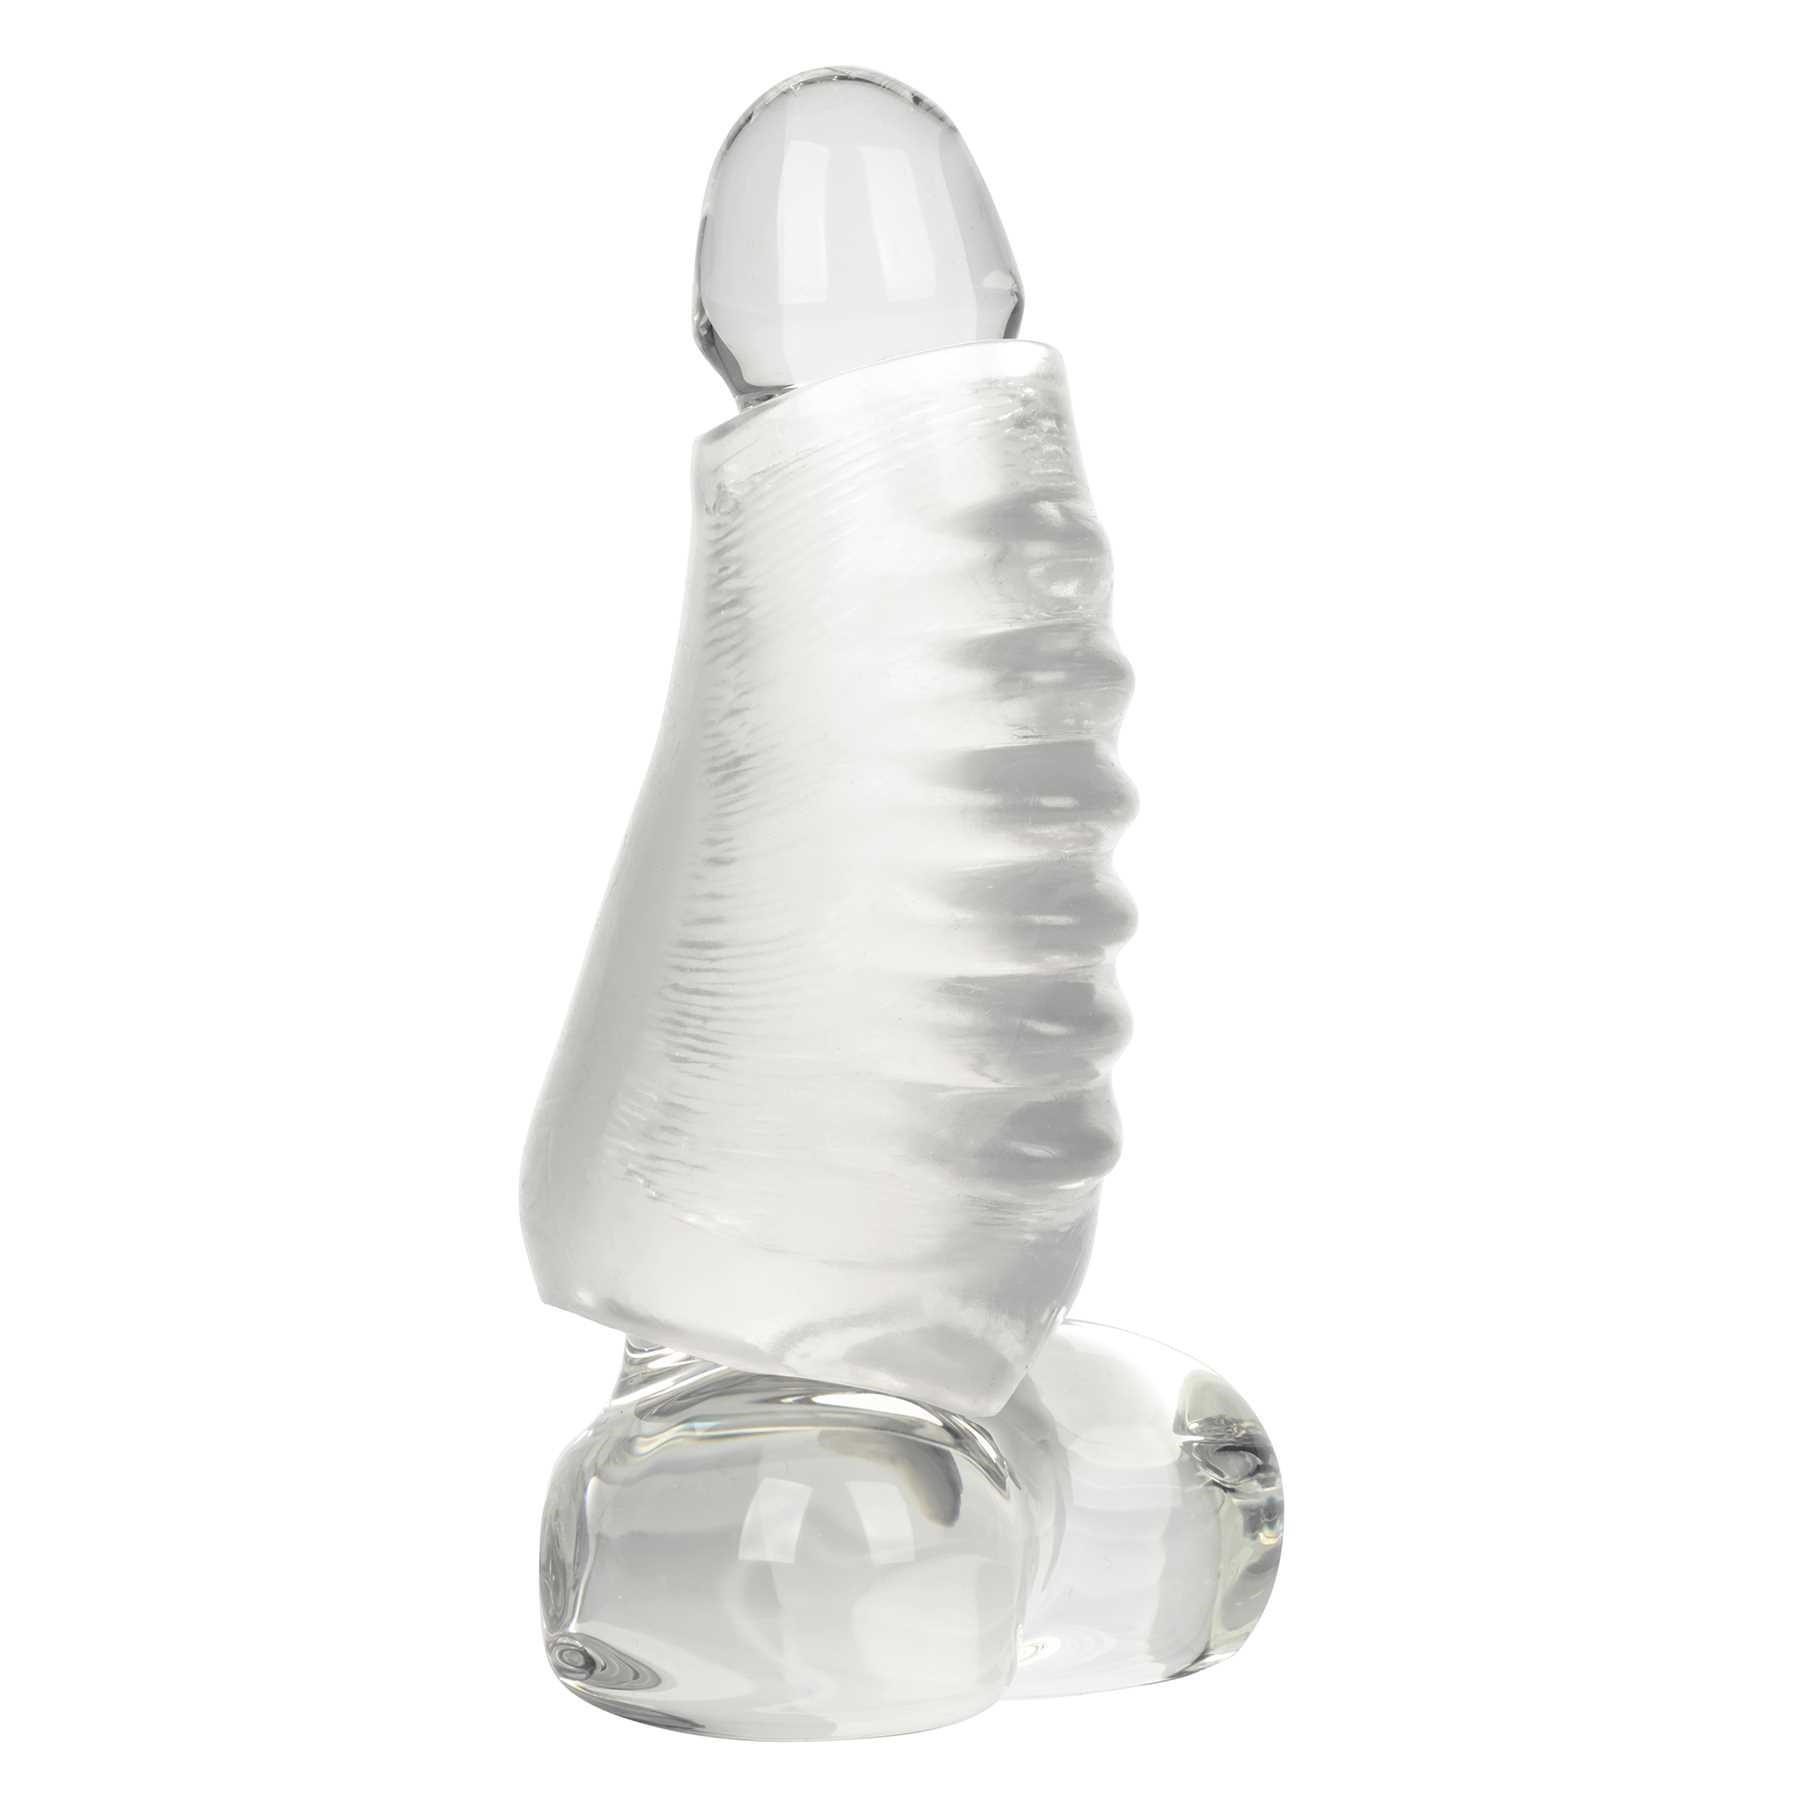 product on penis model